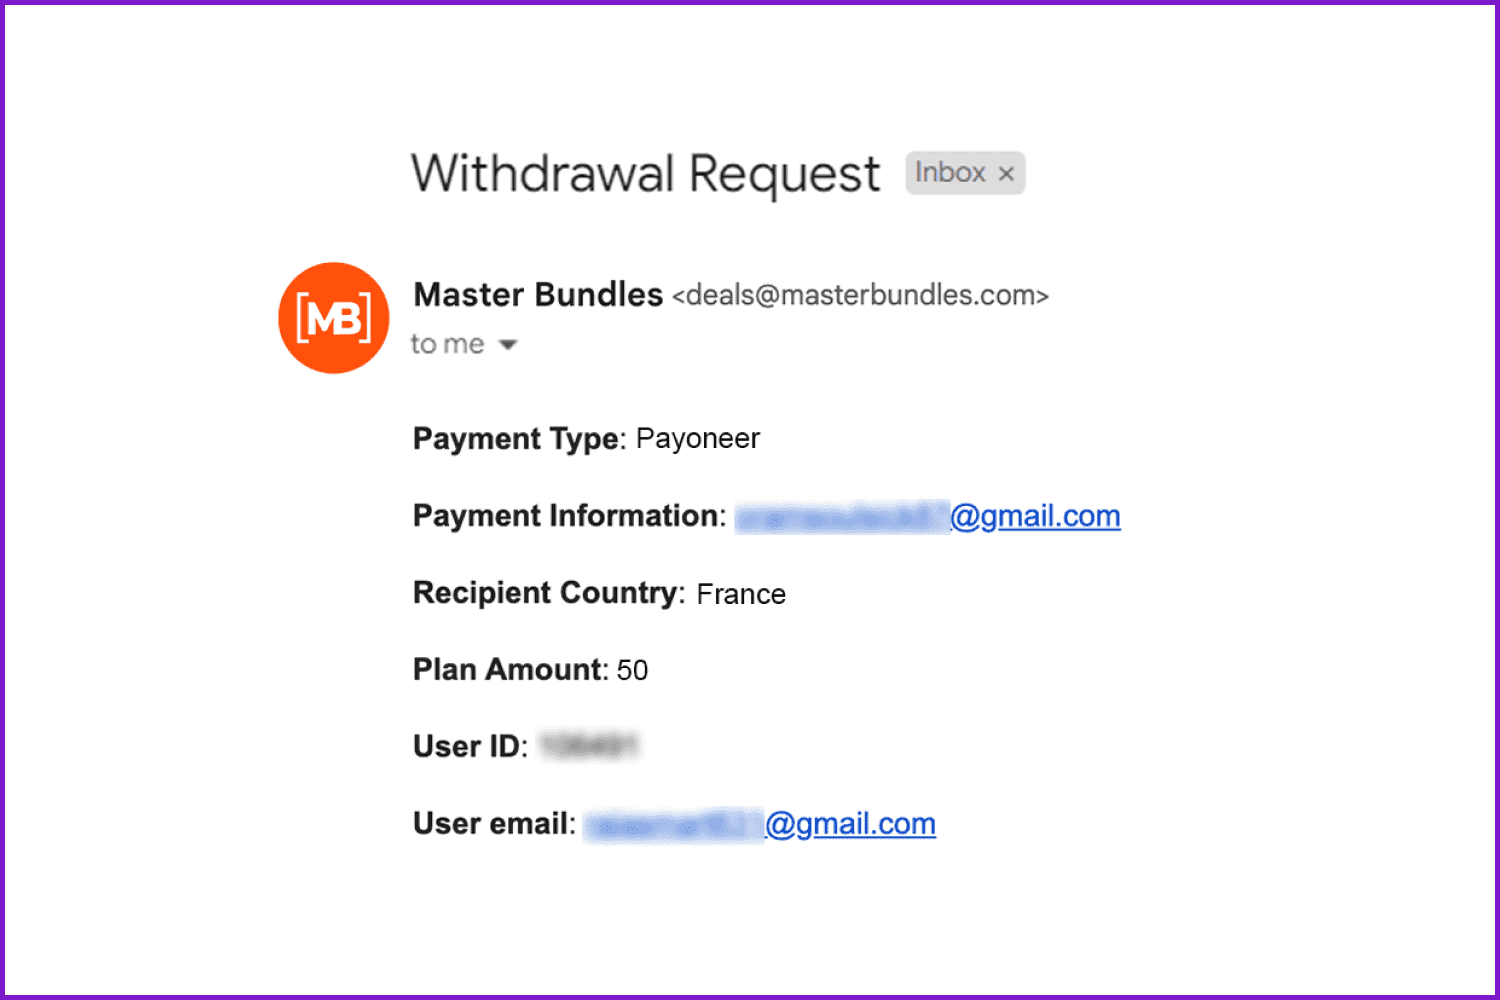 Screenshot of the Withdrawal Request form.